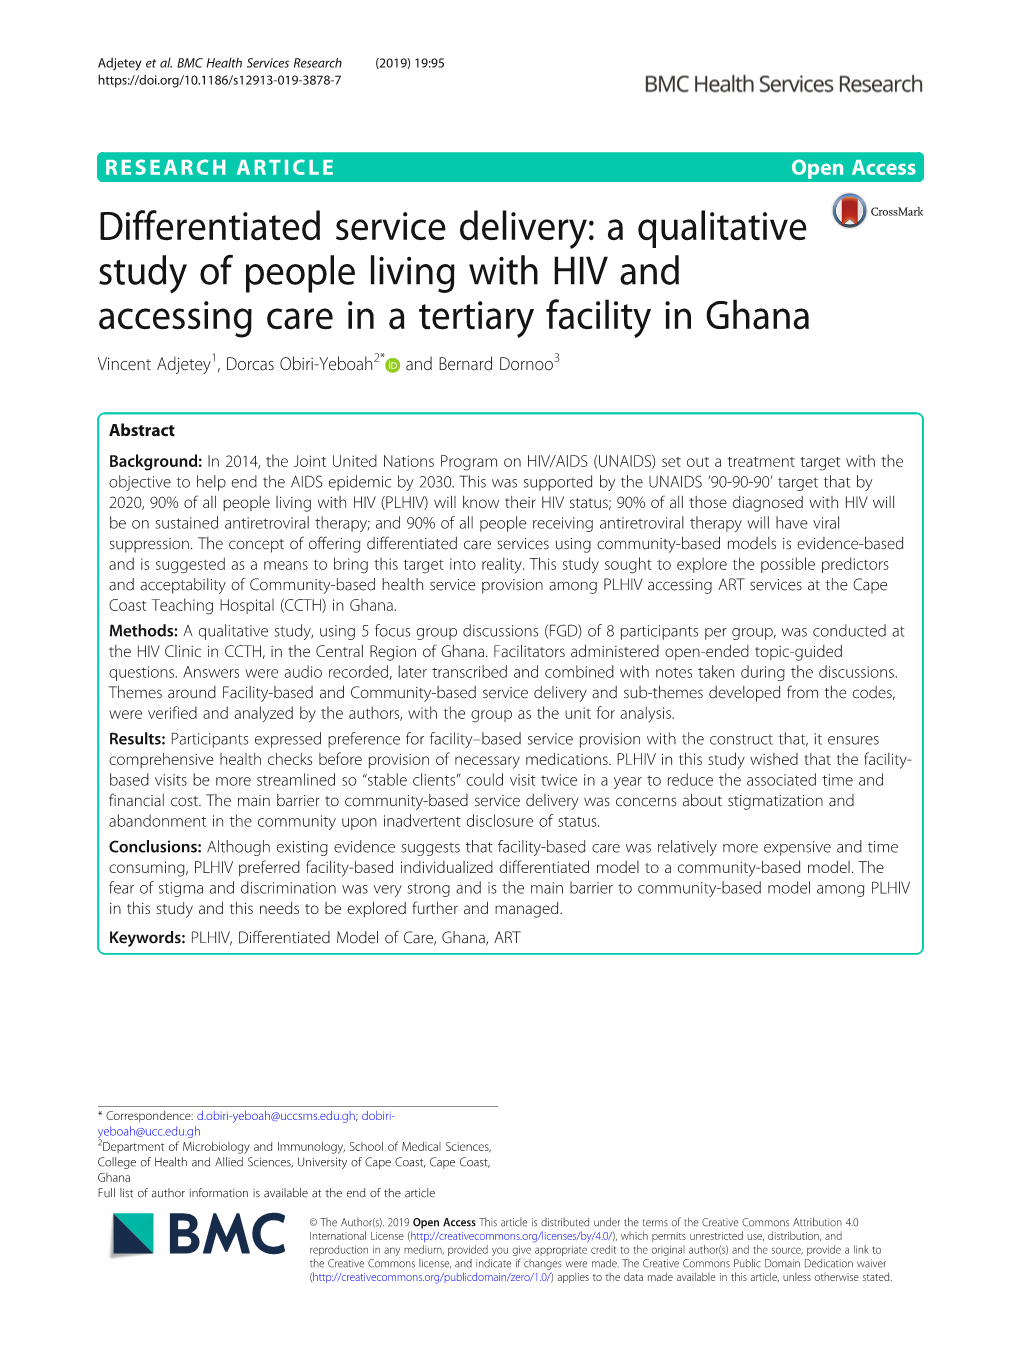 A Qualitative Study of People Living with HIV and Accessing Care in a Tertiary Facility in Ghana Vincent Adjetey1, Dorcas Obiri-Yeboah2* and Bernard Dornoo3